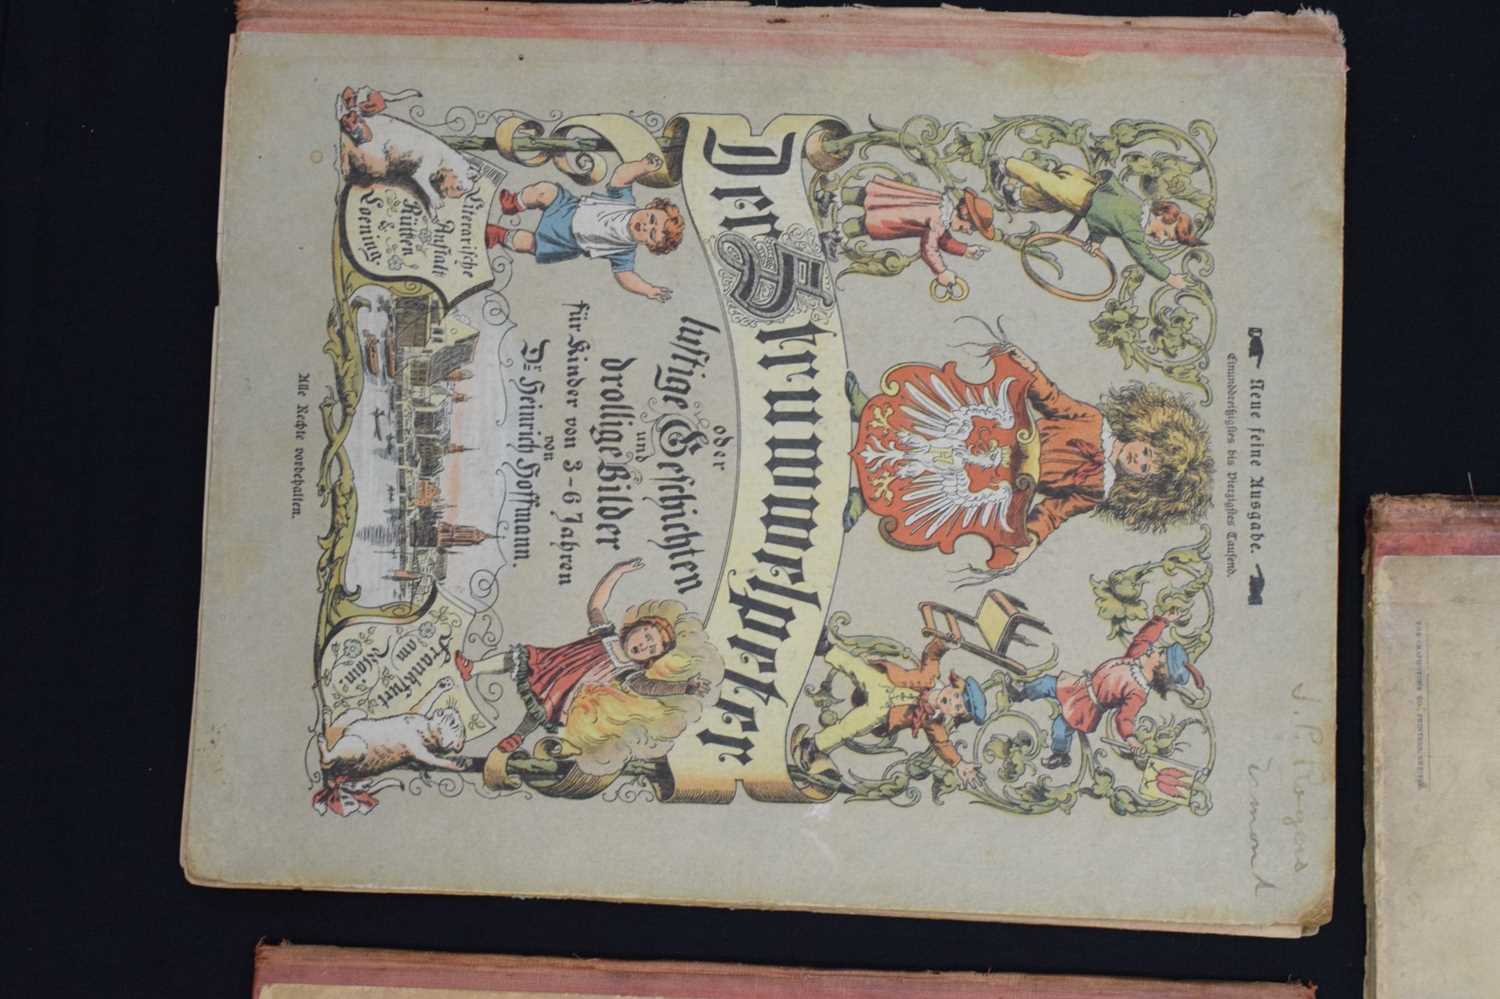 'Der Struwwelpeter' by Dr Heinrich Hoffman, German and English editions - Image 4 of 12